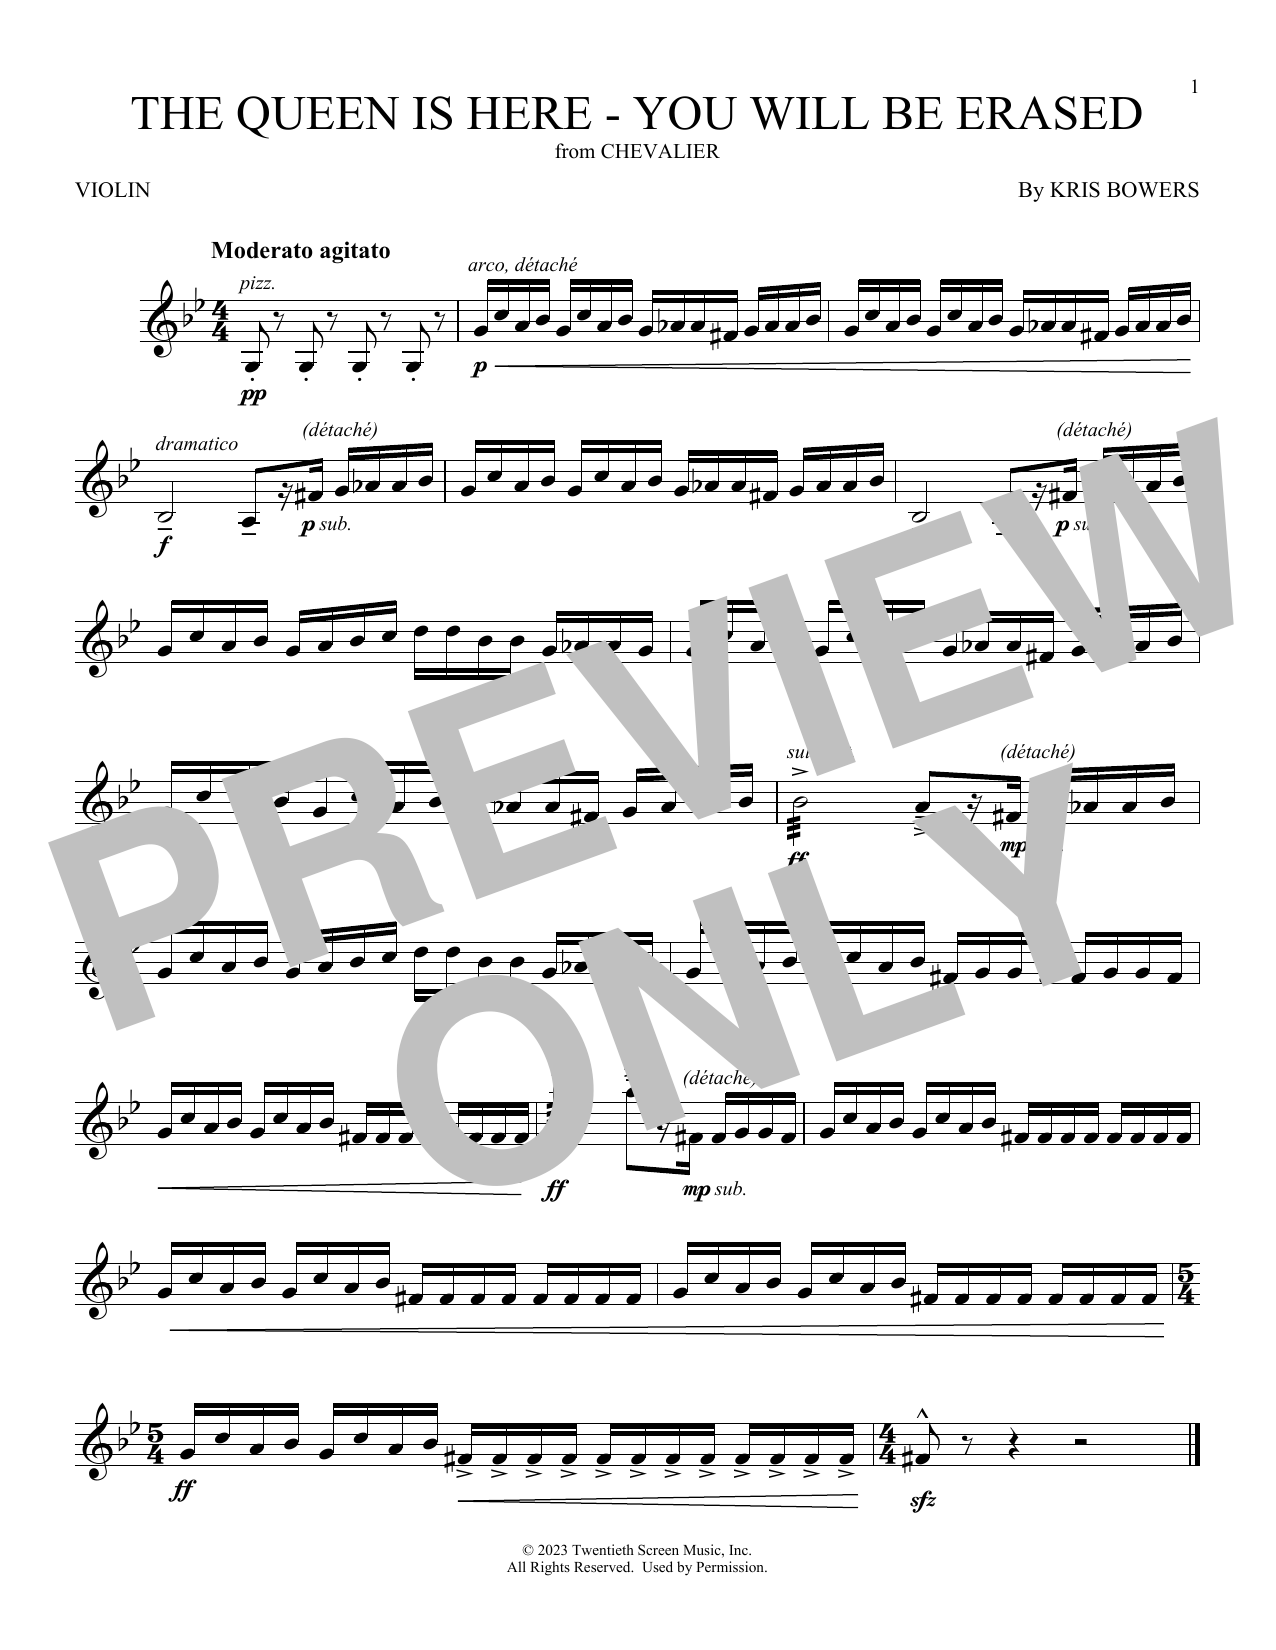 Download Kris Bowers The Queen Is Here - You Will Be Erased Sheet Music